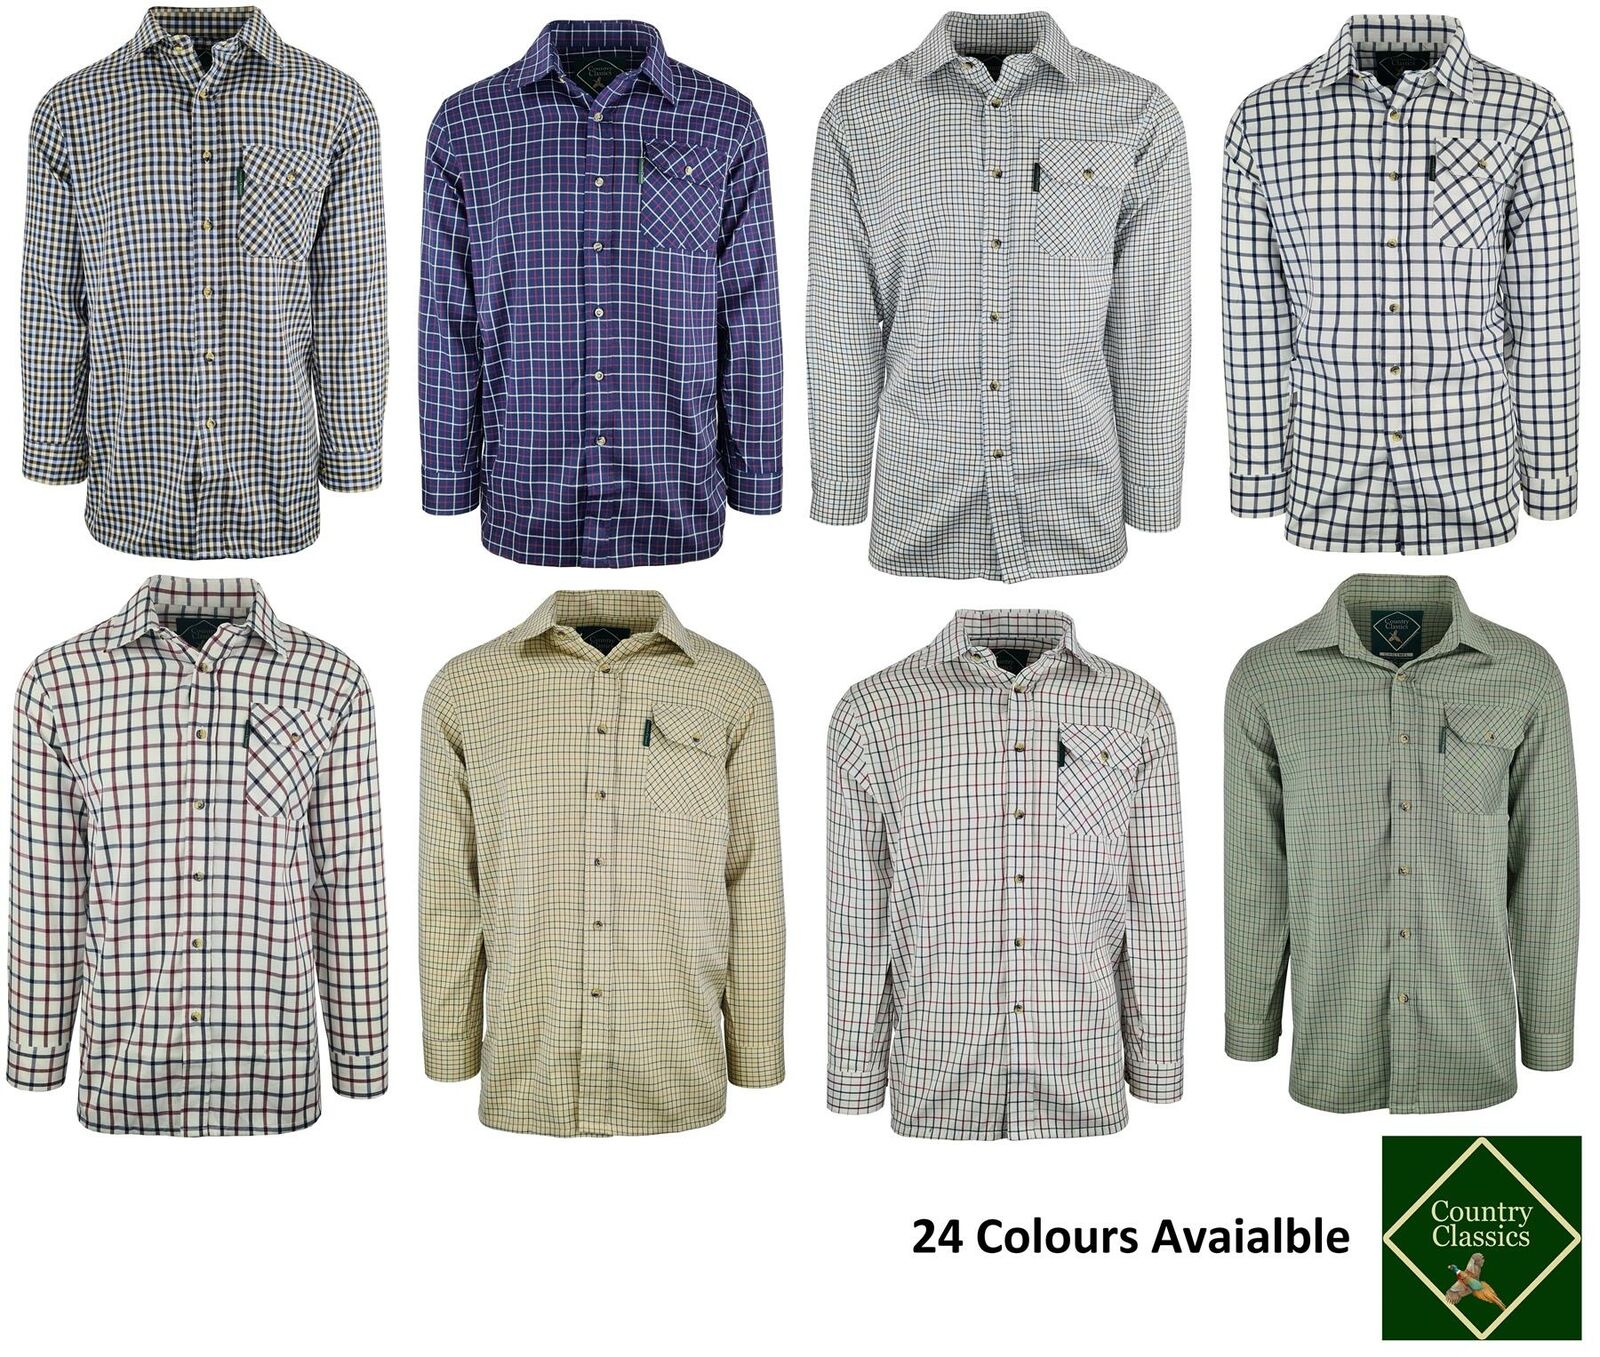 Country Classics Mens Long Sleeve Quality Check Shirt Cotton Work  24 Colours